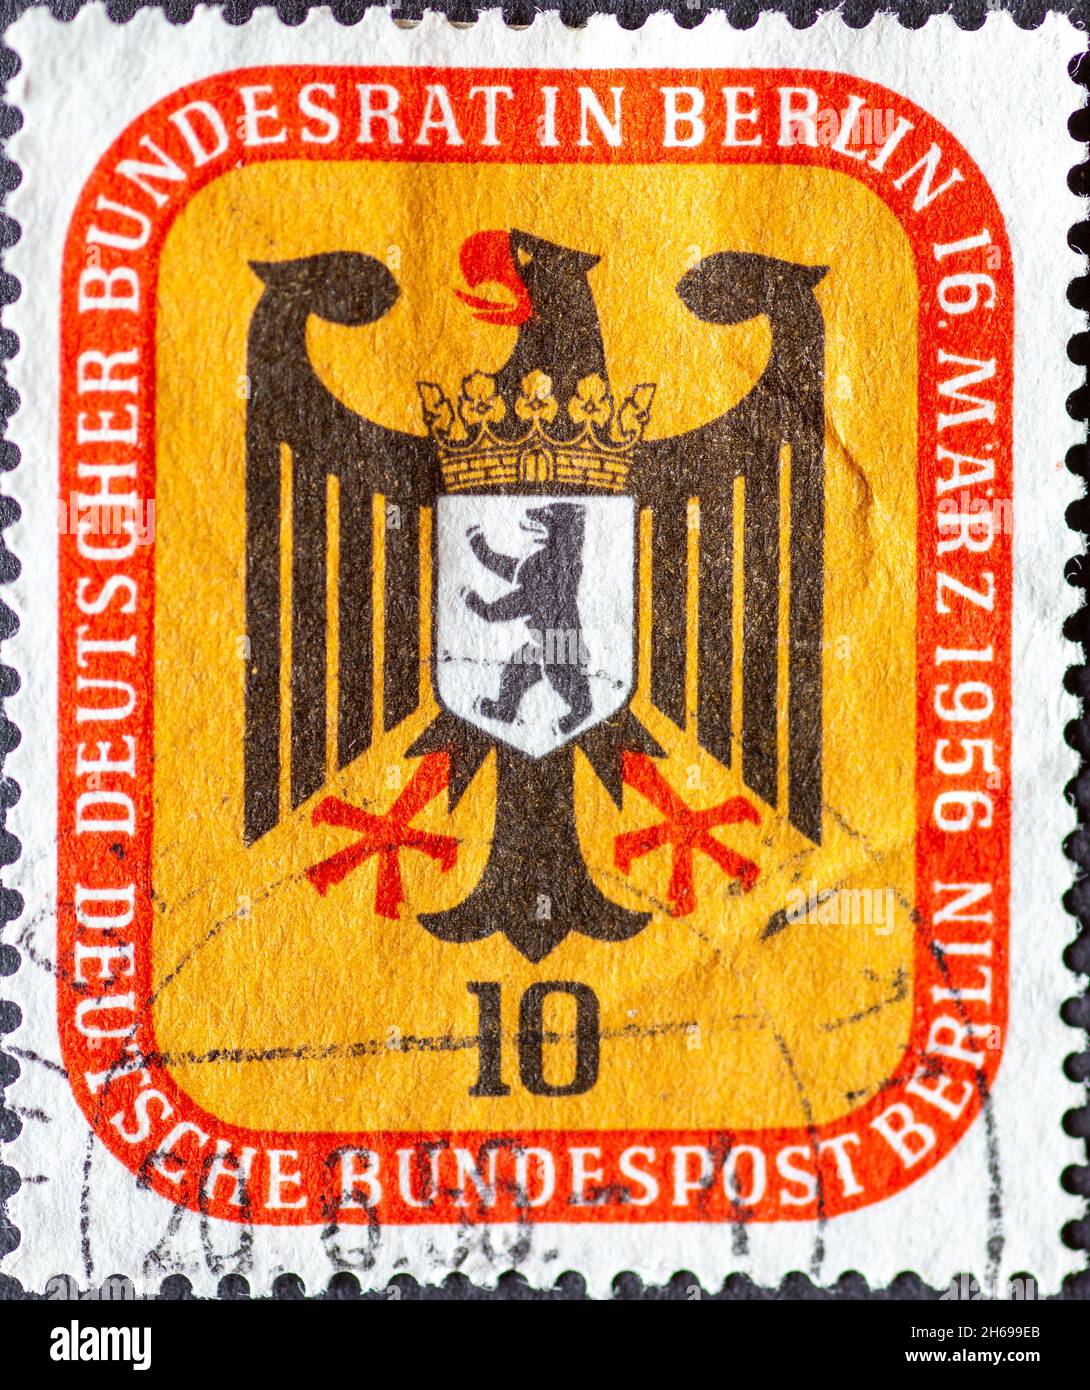 GERMANY, Berlin - CIRCA 1956: a postage stamp from Germany, Berlin showing Federal eagle and coat of arms of Berlin. Federal Council Germany in Berlin Stock Photo